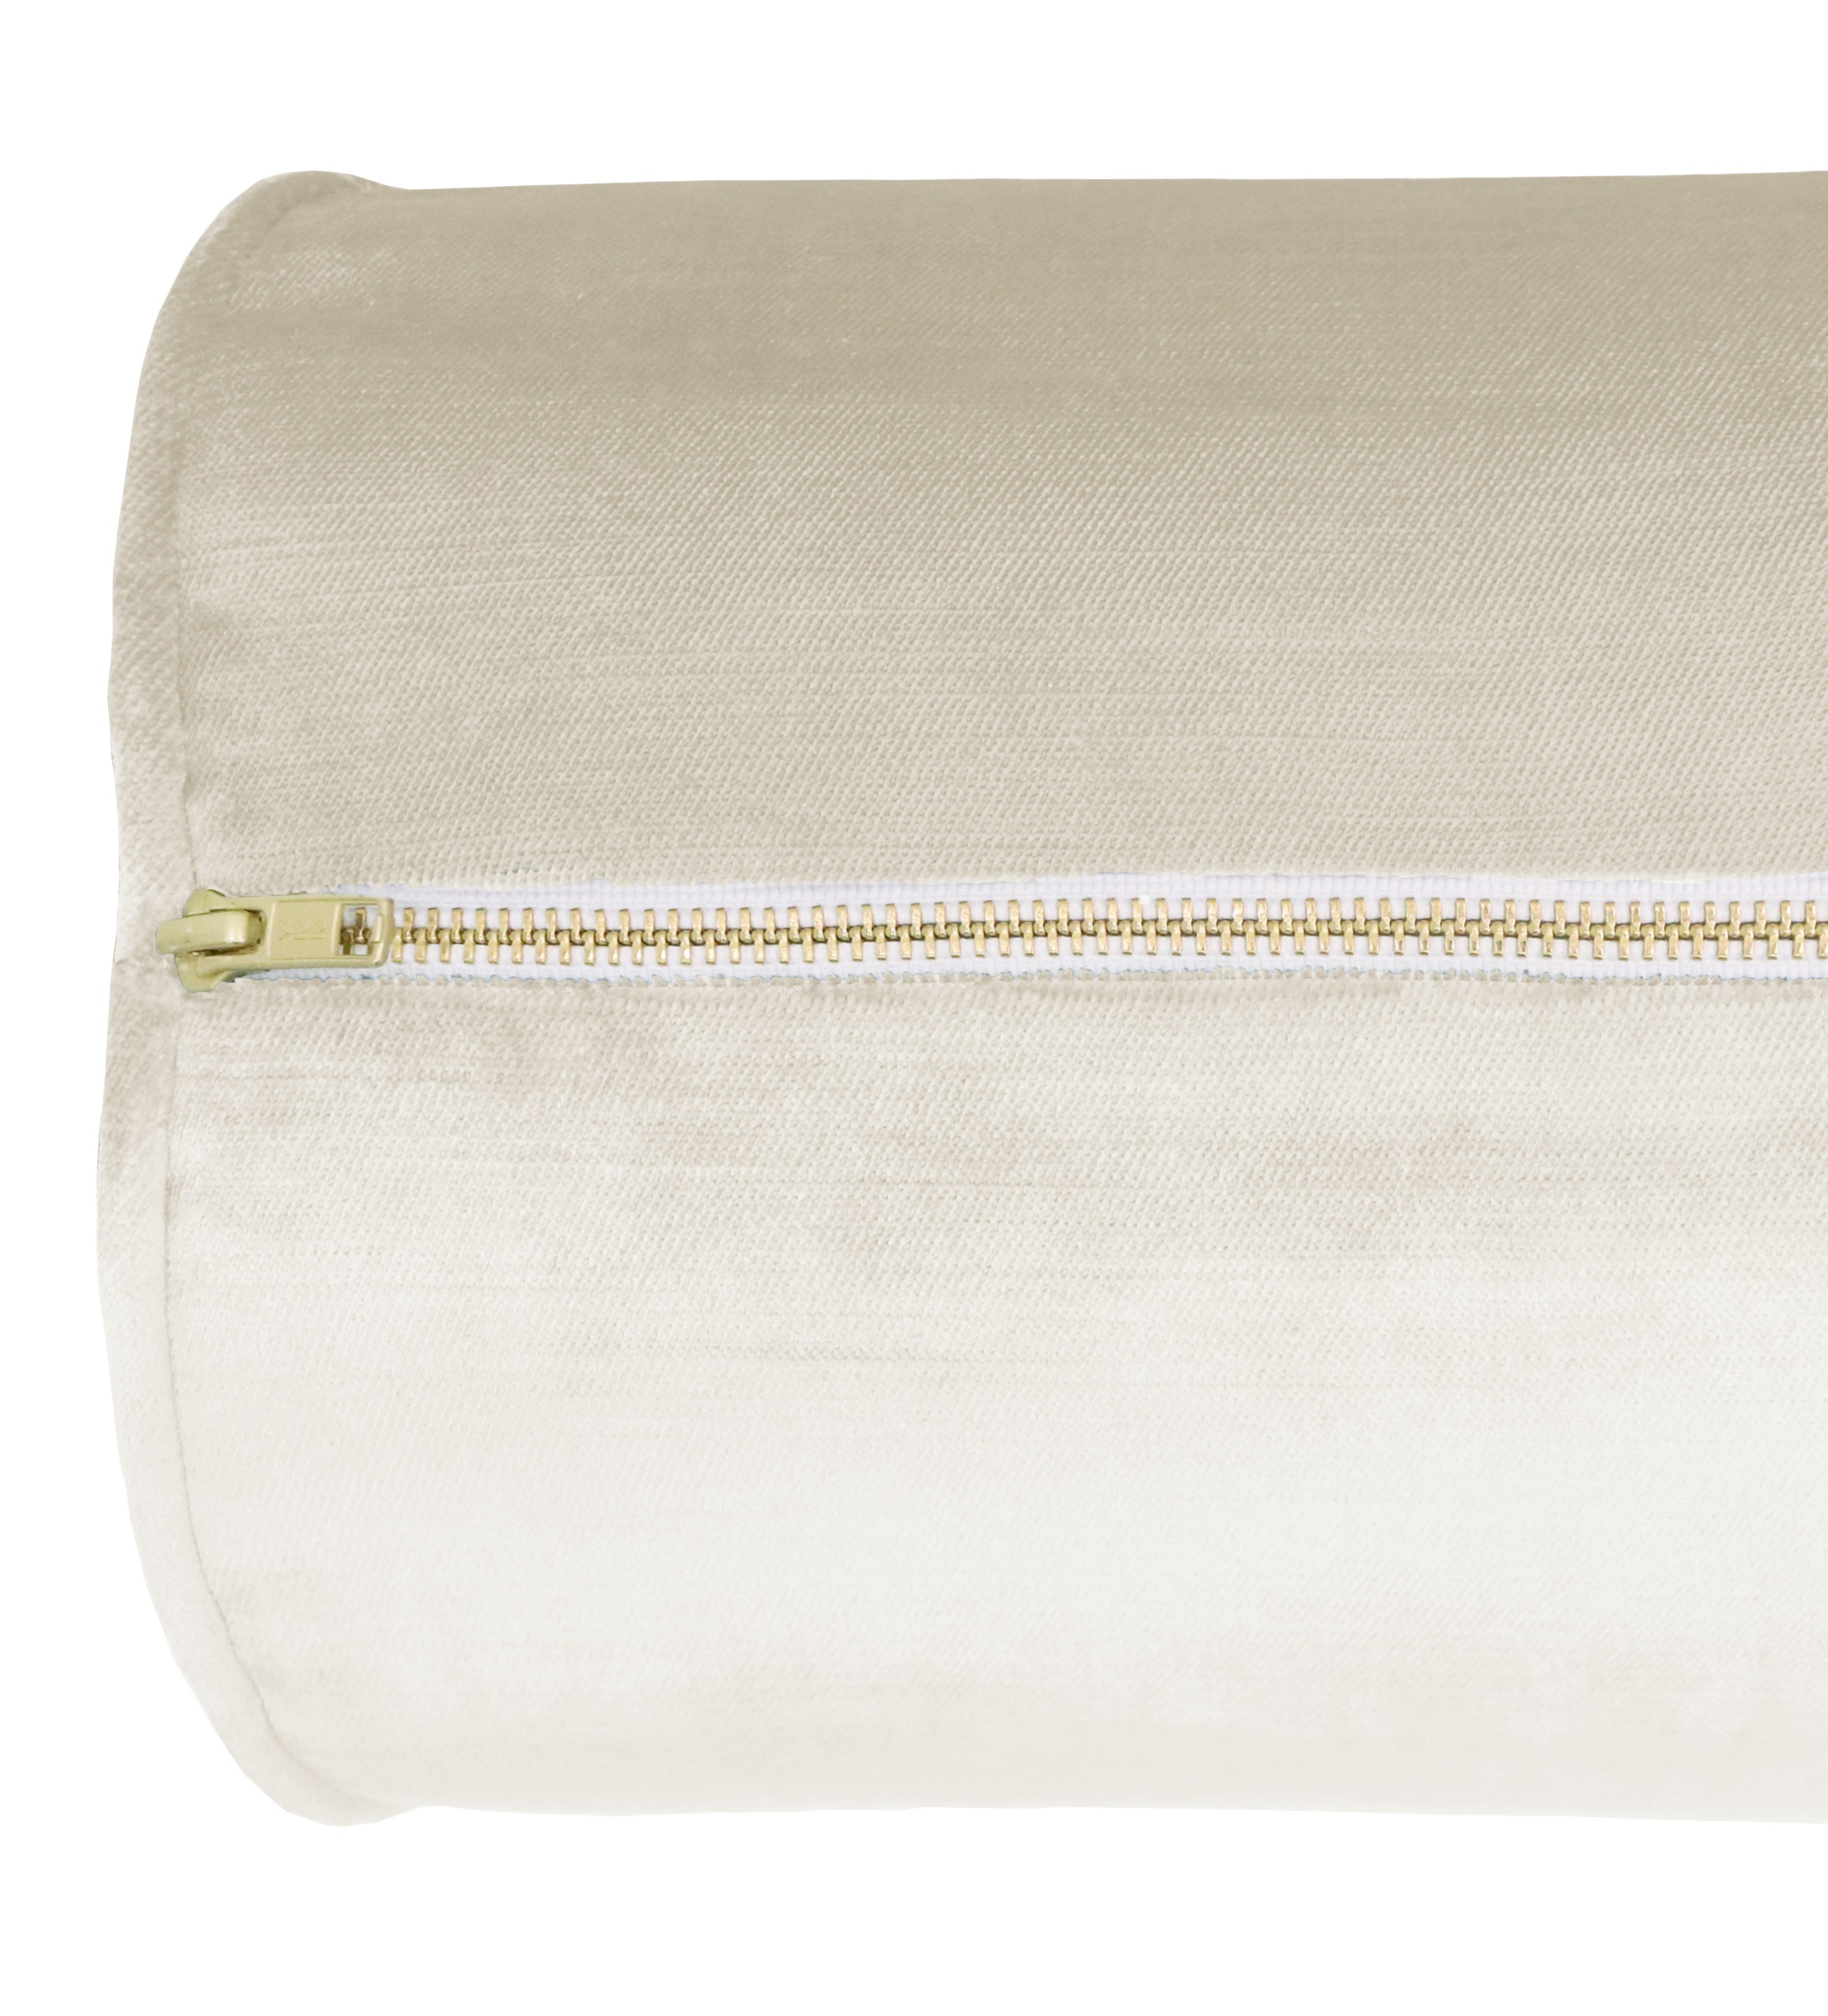 THE BOLSTER :: FAUX SILK VELVET // ALABASTER - TWIN // 9" X 24" - Image 1